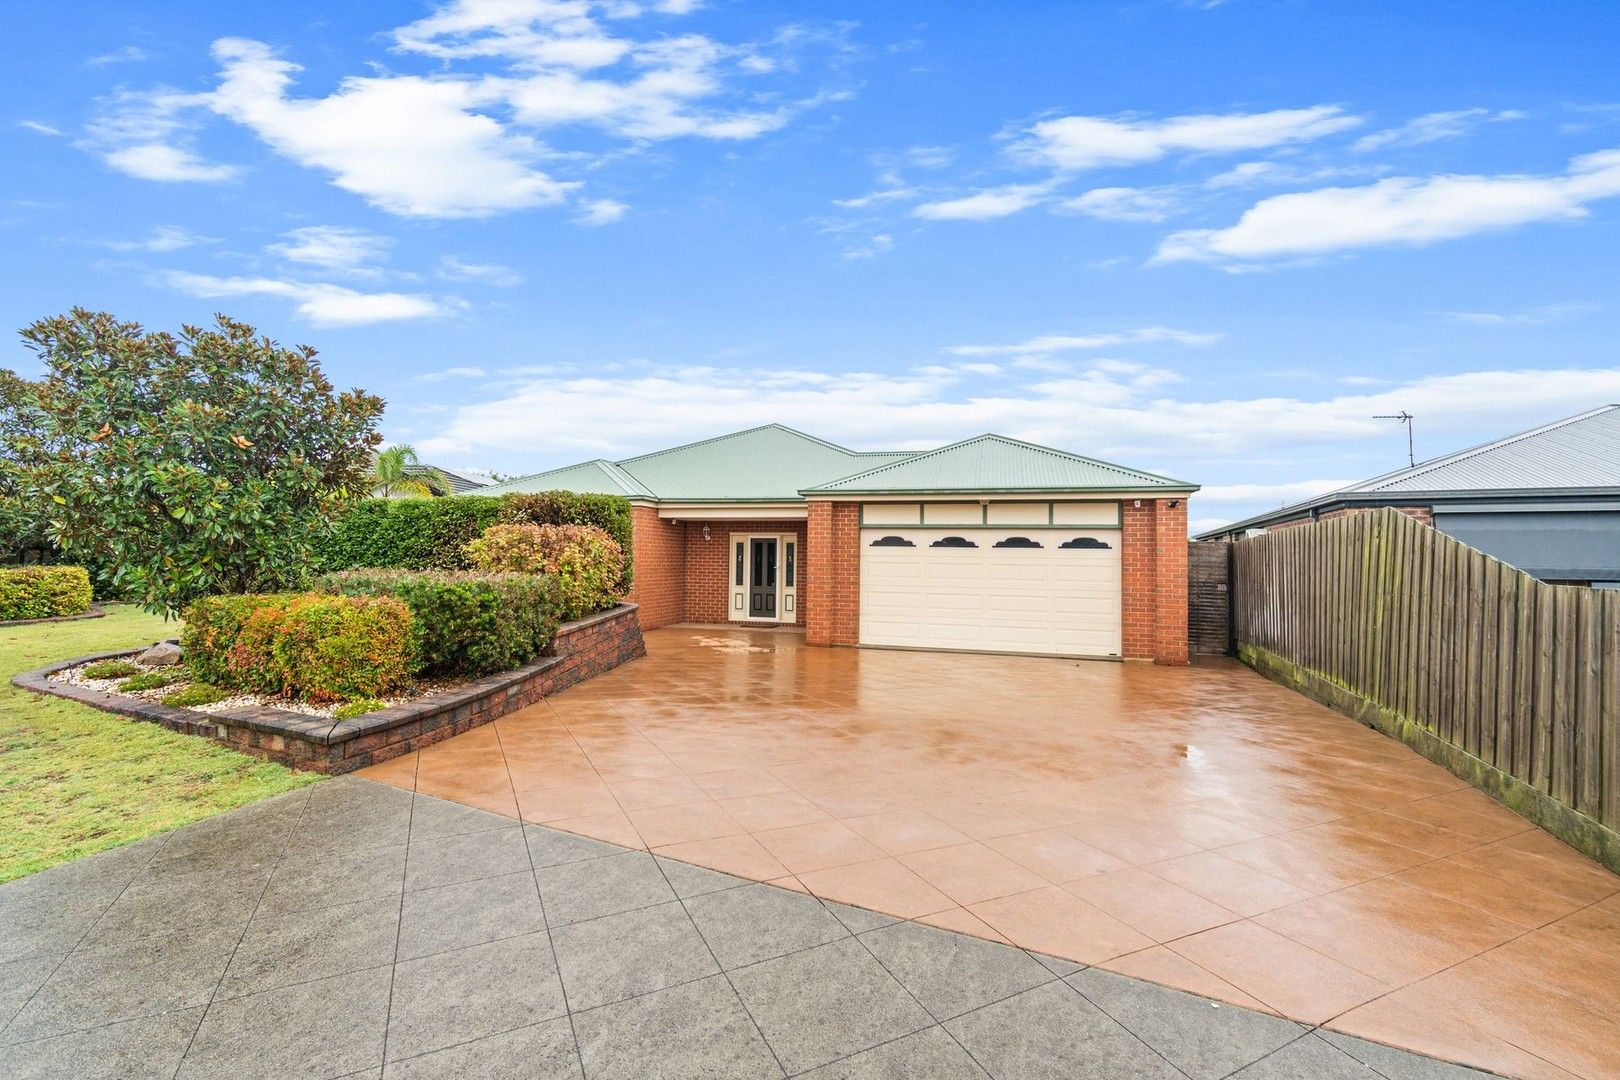 4 bedrooms House in 11 Wexford Close TRARALGON VIC, 3844